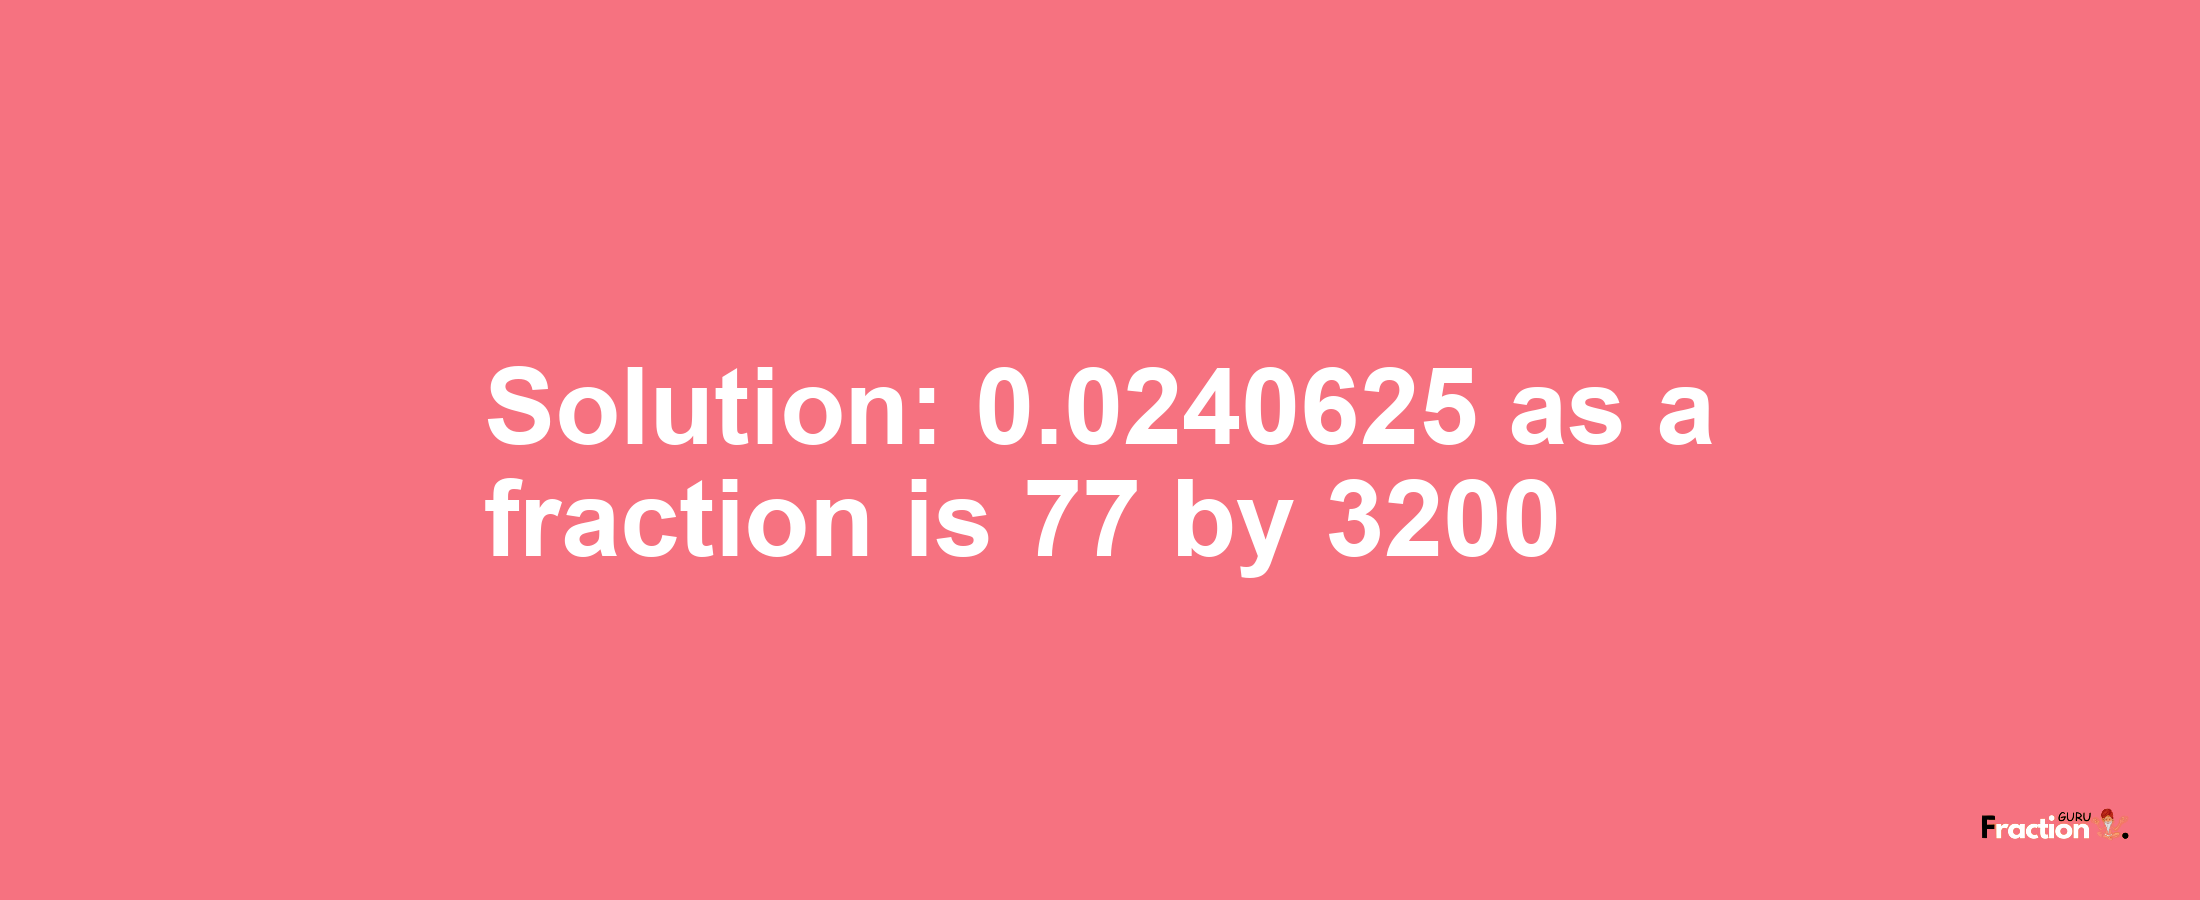 Solution:0.0240625 as a fraction is 77/3200